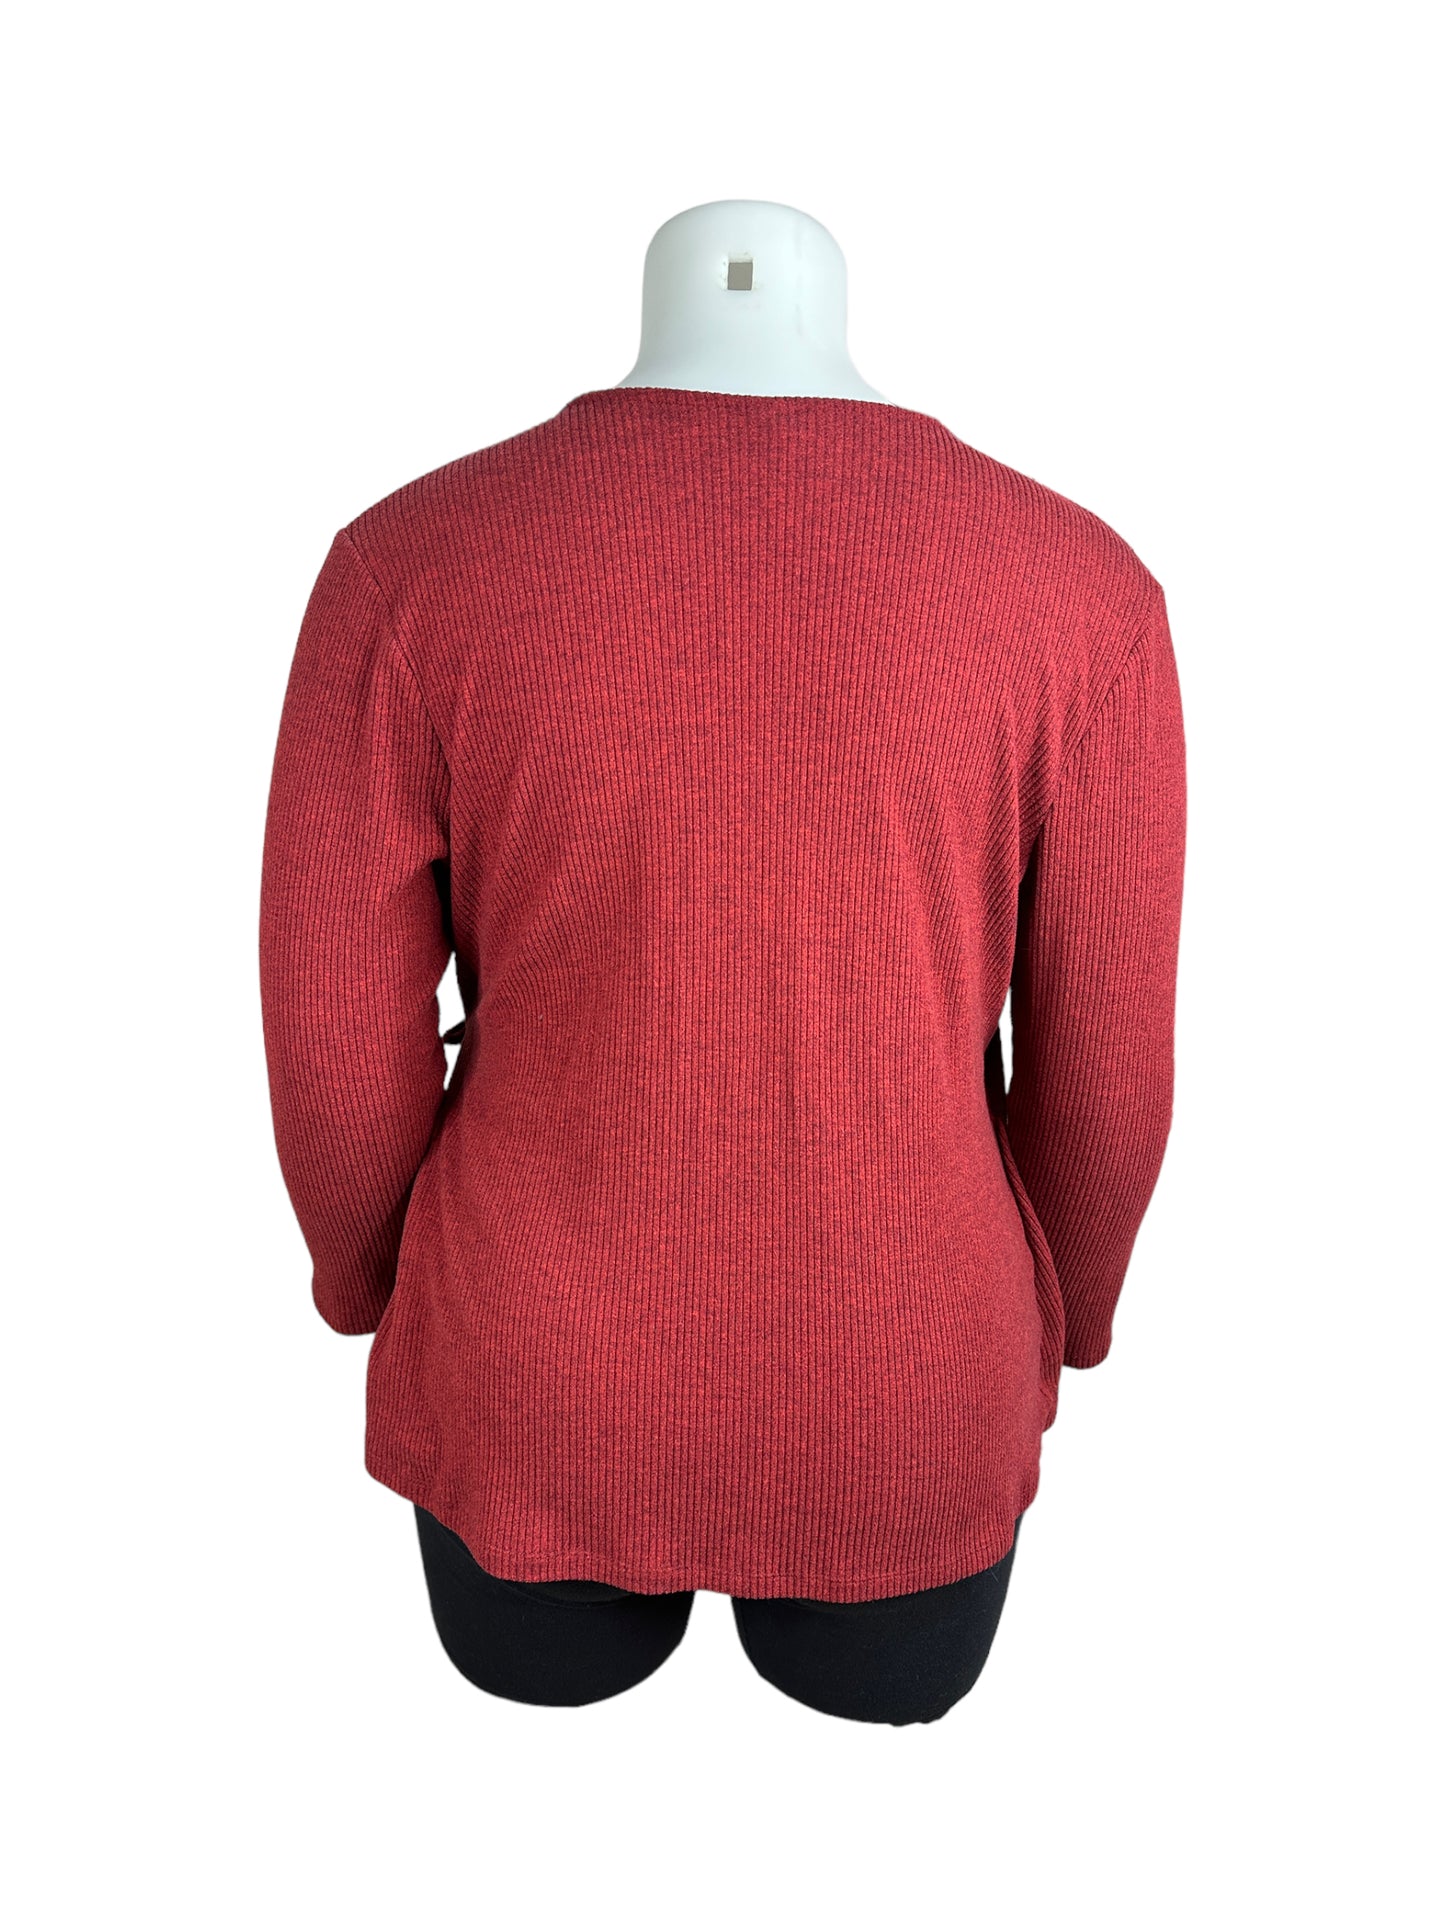 “Old Navy” Red Long Sleeve Top (XXL)